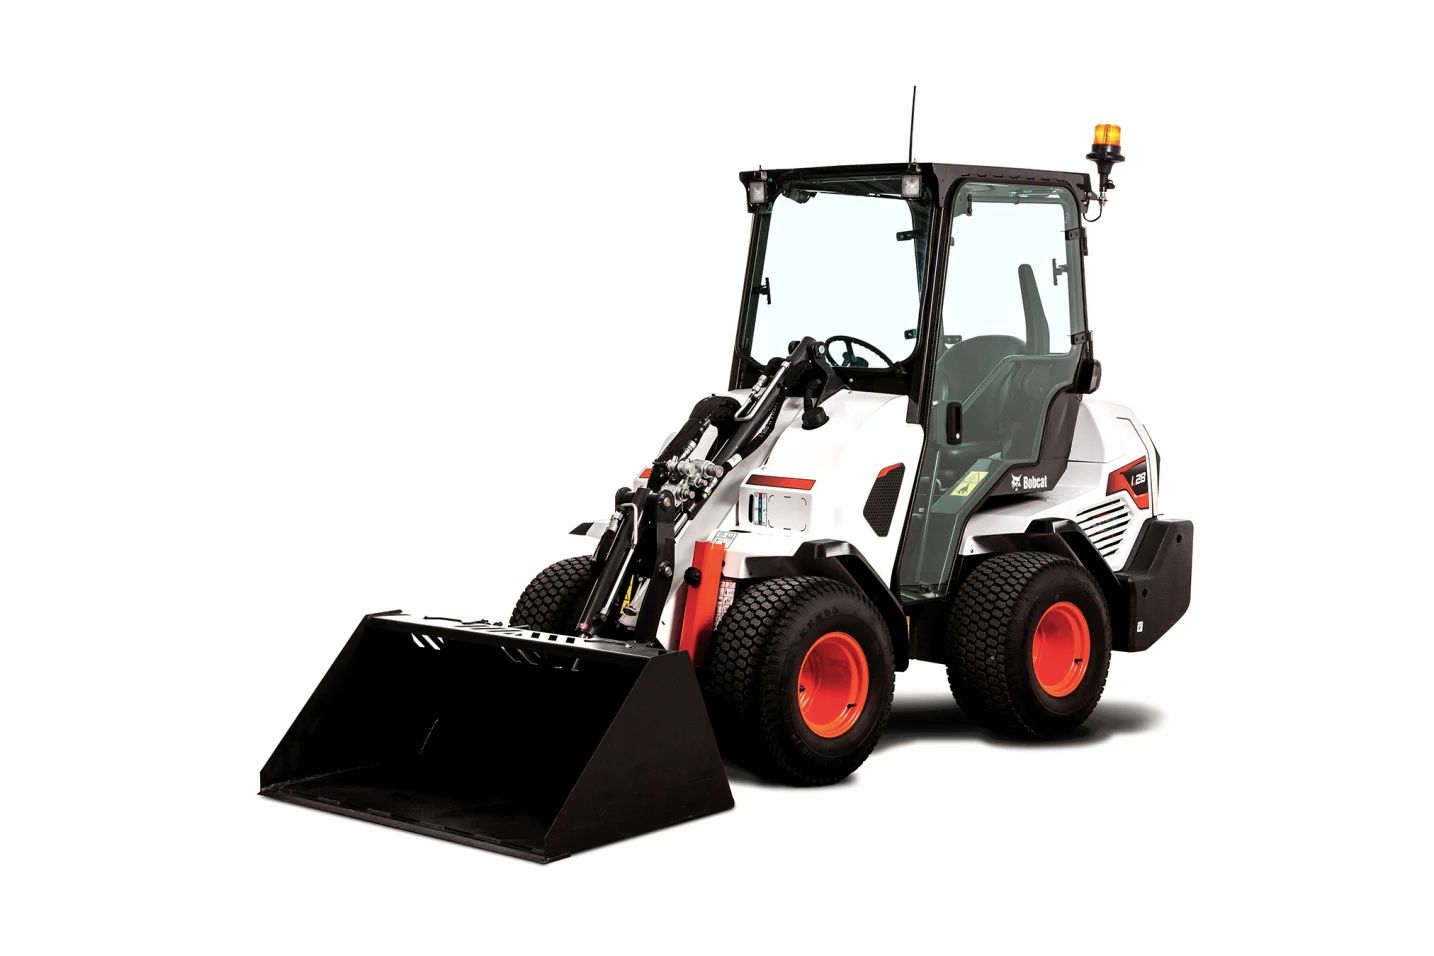 Browse Specs and more for the L28 Small Articulated Loader - White Star Machinery